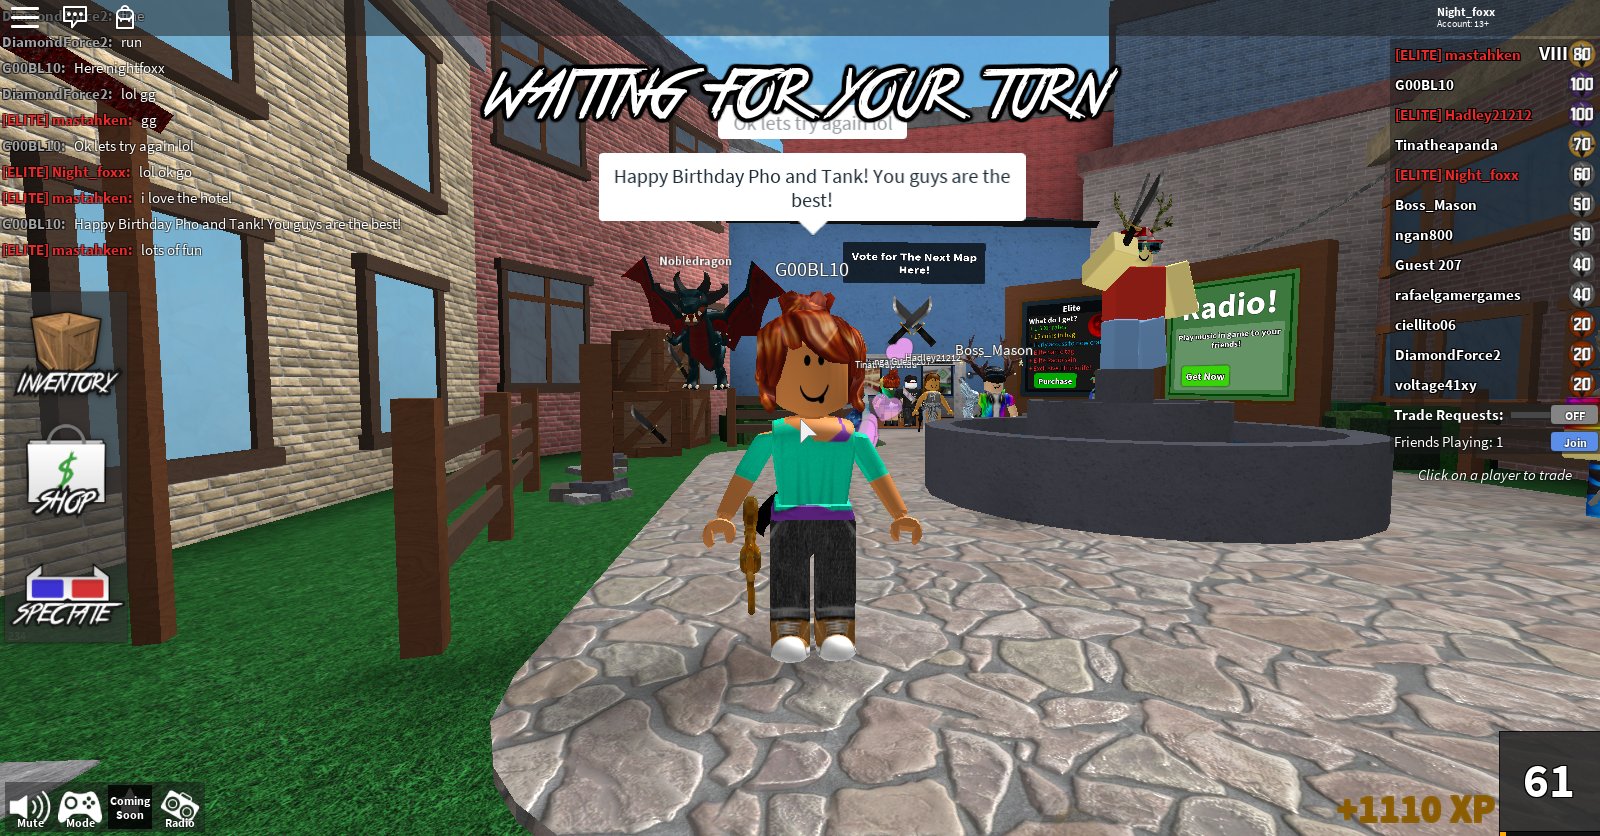 Nightfoxx Brandon On Twitter Playing Some Roblox And Had A Friend Goobl10 Want To Wish Webecomplex And Tank Matt A Very Happy Birthday - nightmare foxx on twitter playing some roblox and had a friend goobl10 want to wish webecomplex and tank matt a very happy birthday